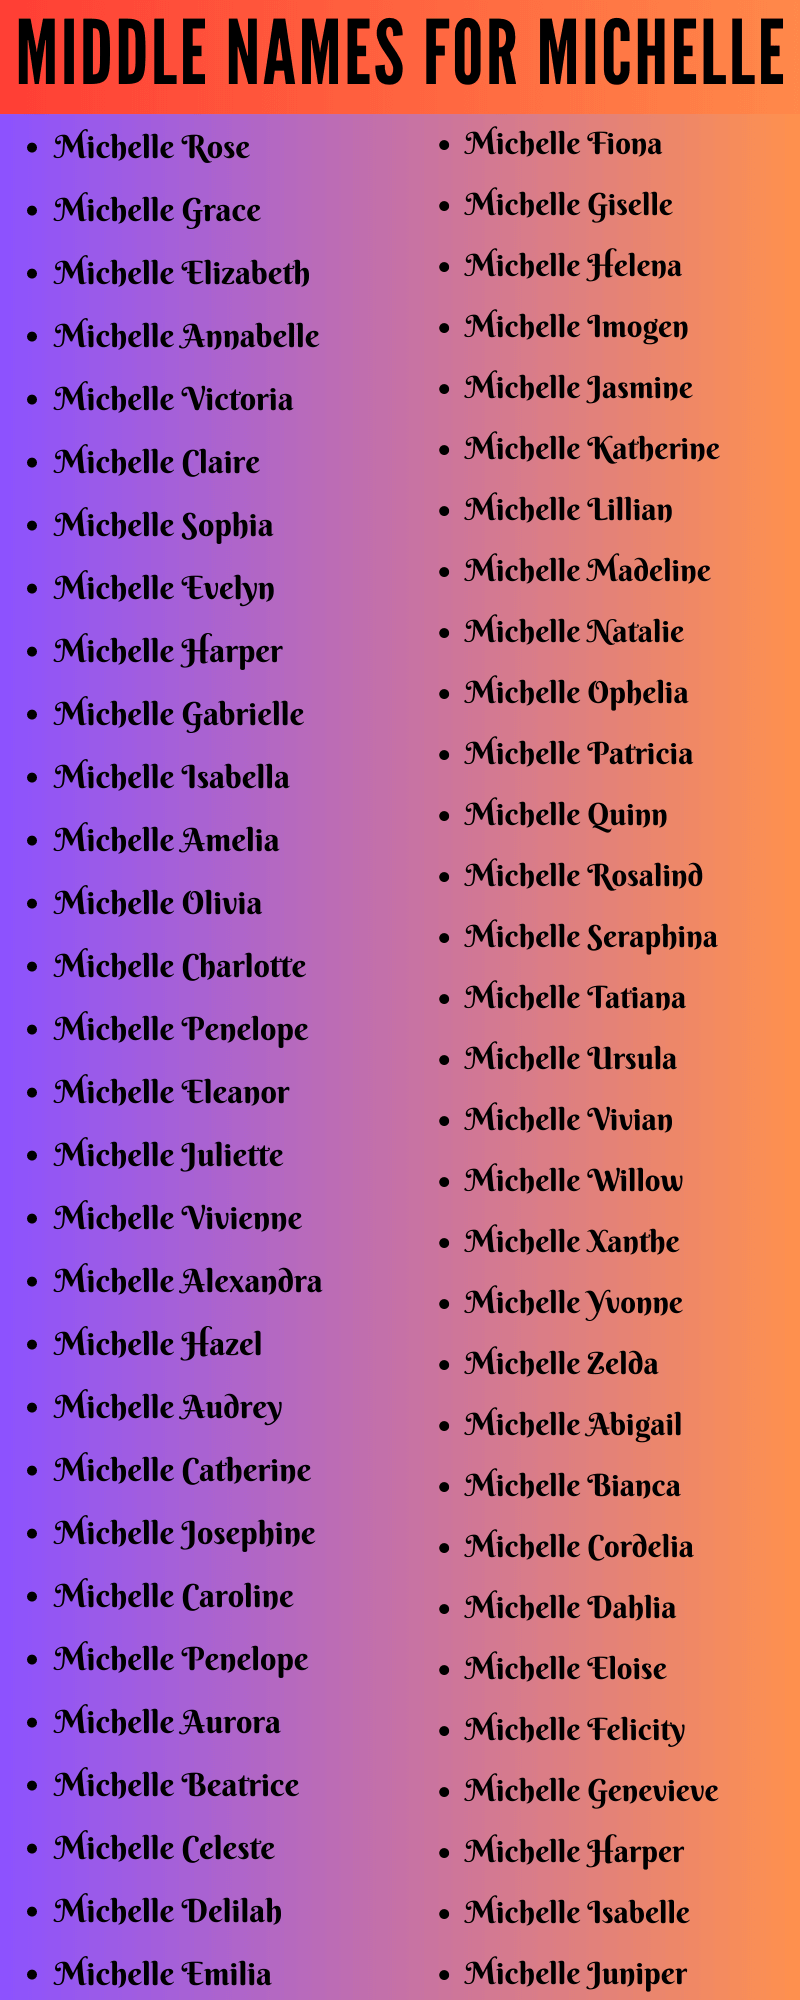 400 Middle Names For Michelle